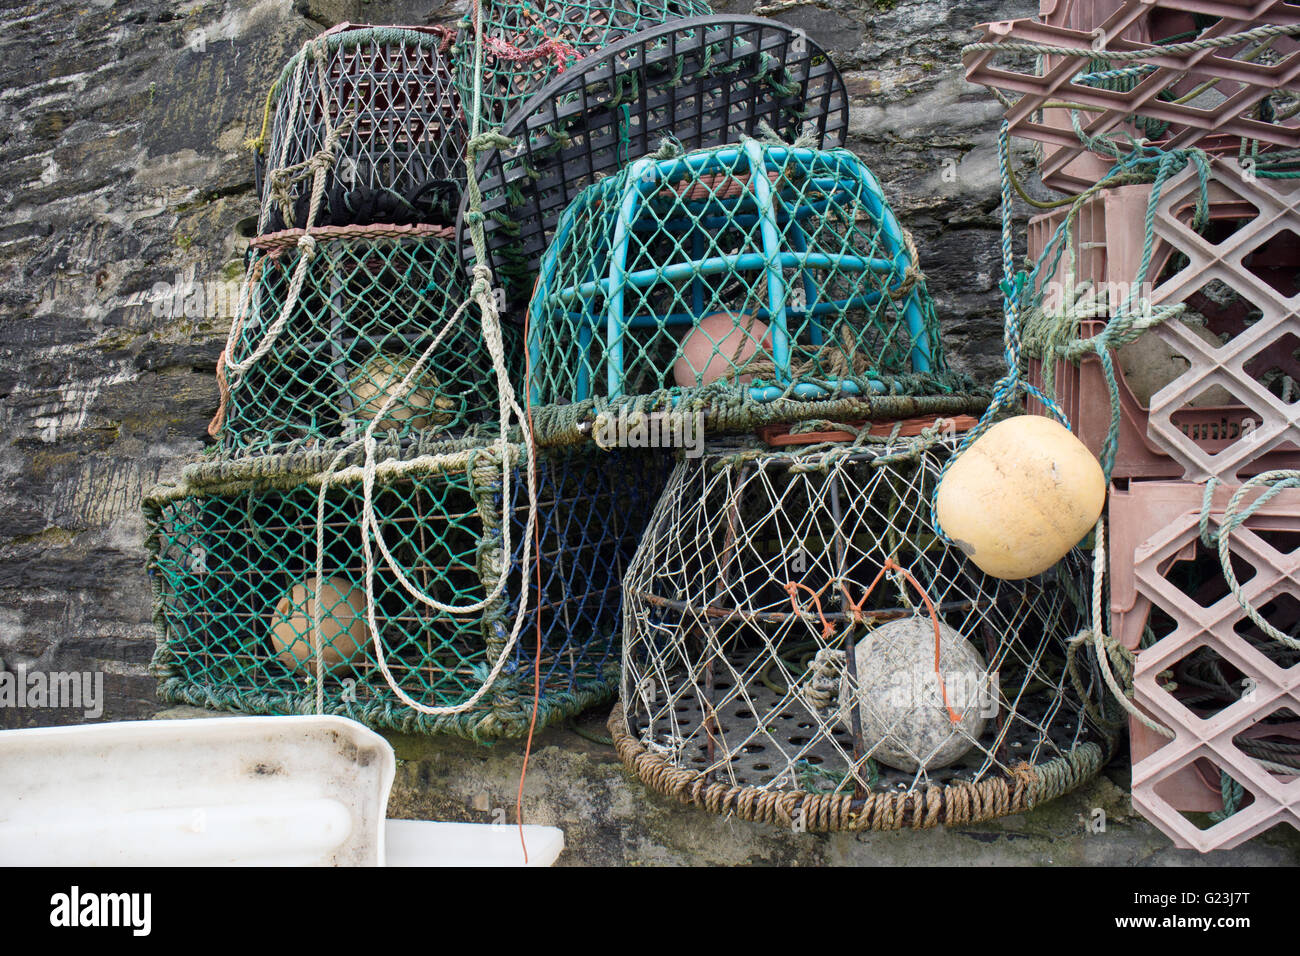 Cornish crab pots at Mevagissey Harbour Cornwall Great Britain Stock Photo